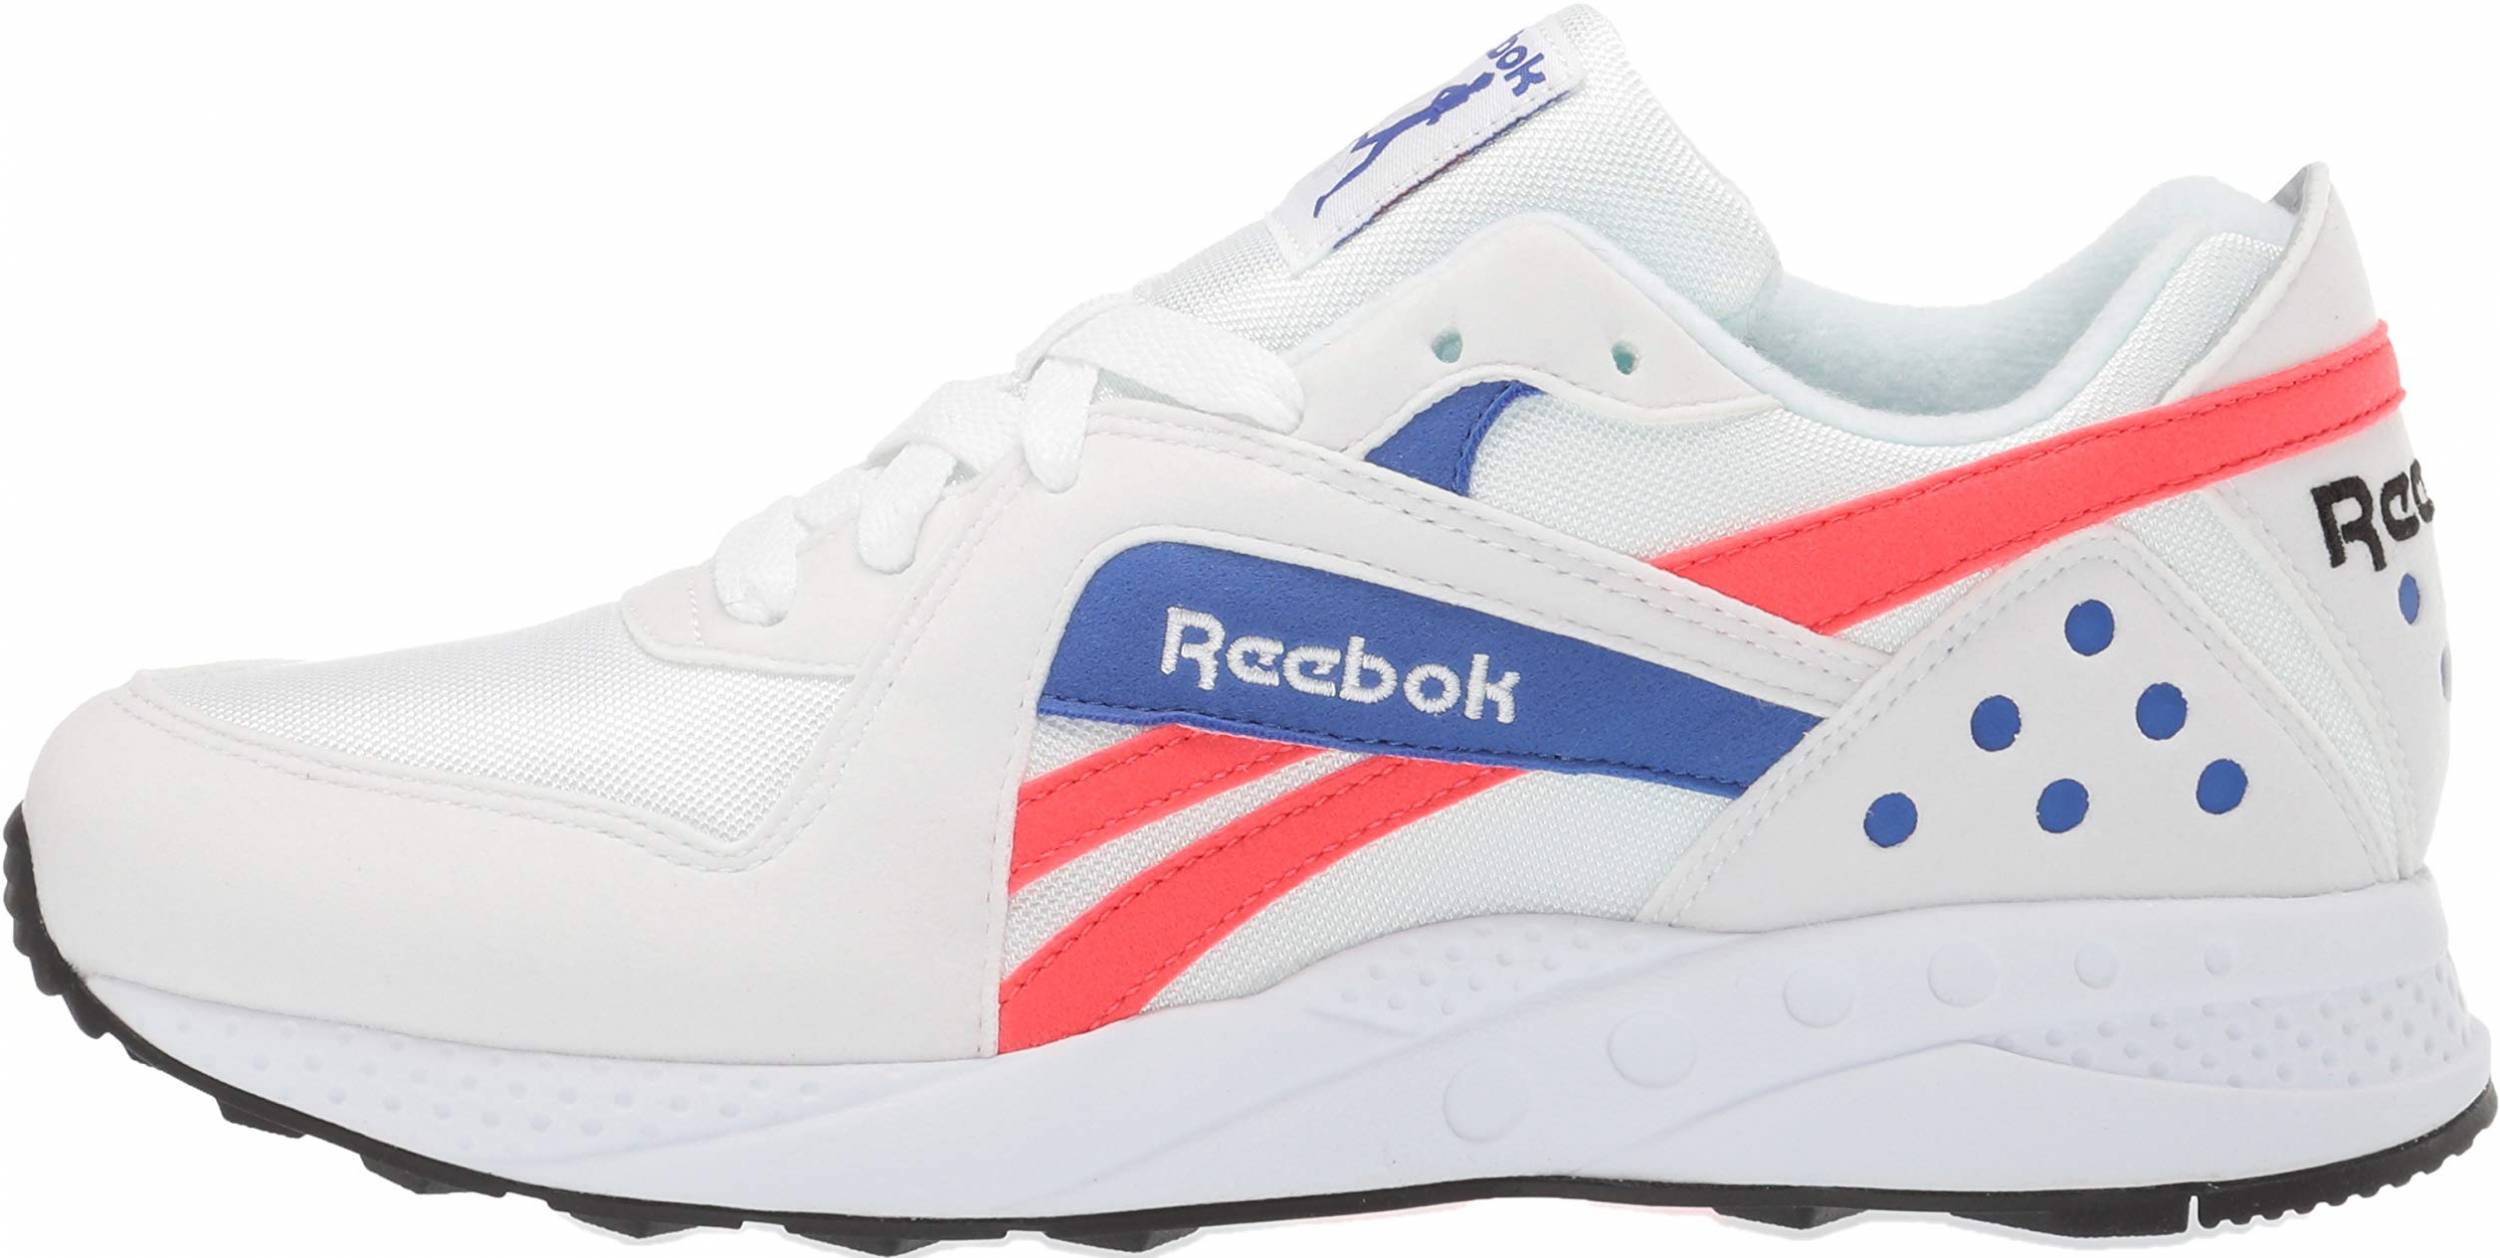 reebok pyro leather trainers white navy